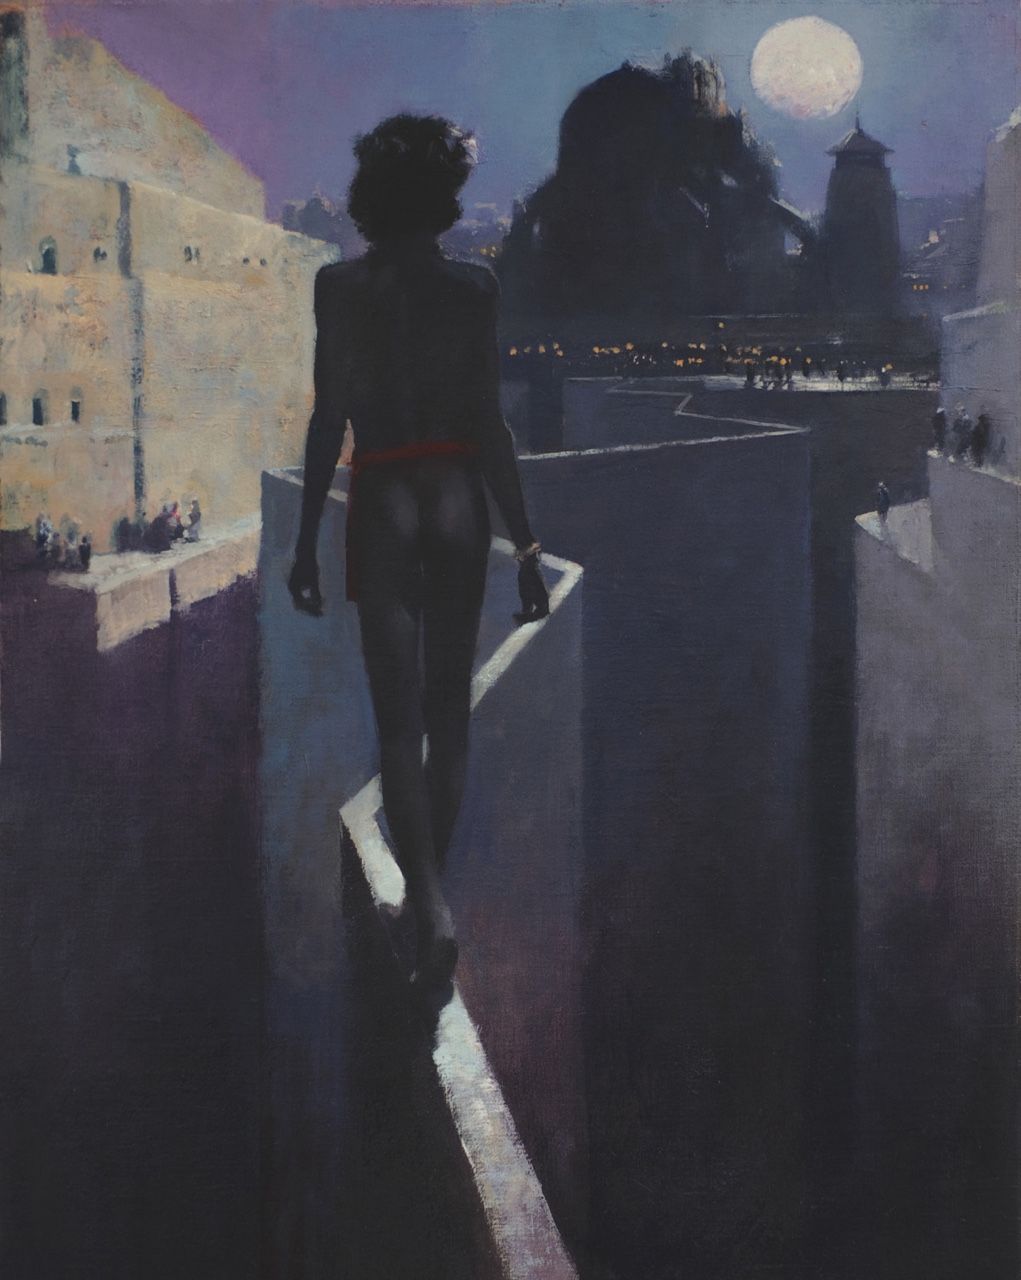 John Harris - Girl on the wall (emerging from John's own concept of - The City of Fire).jpg